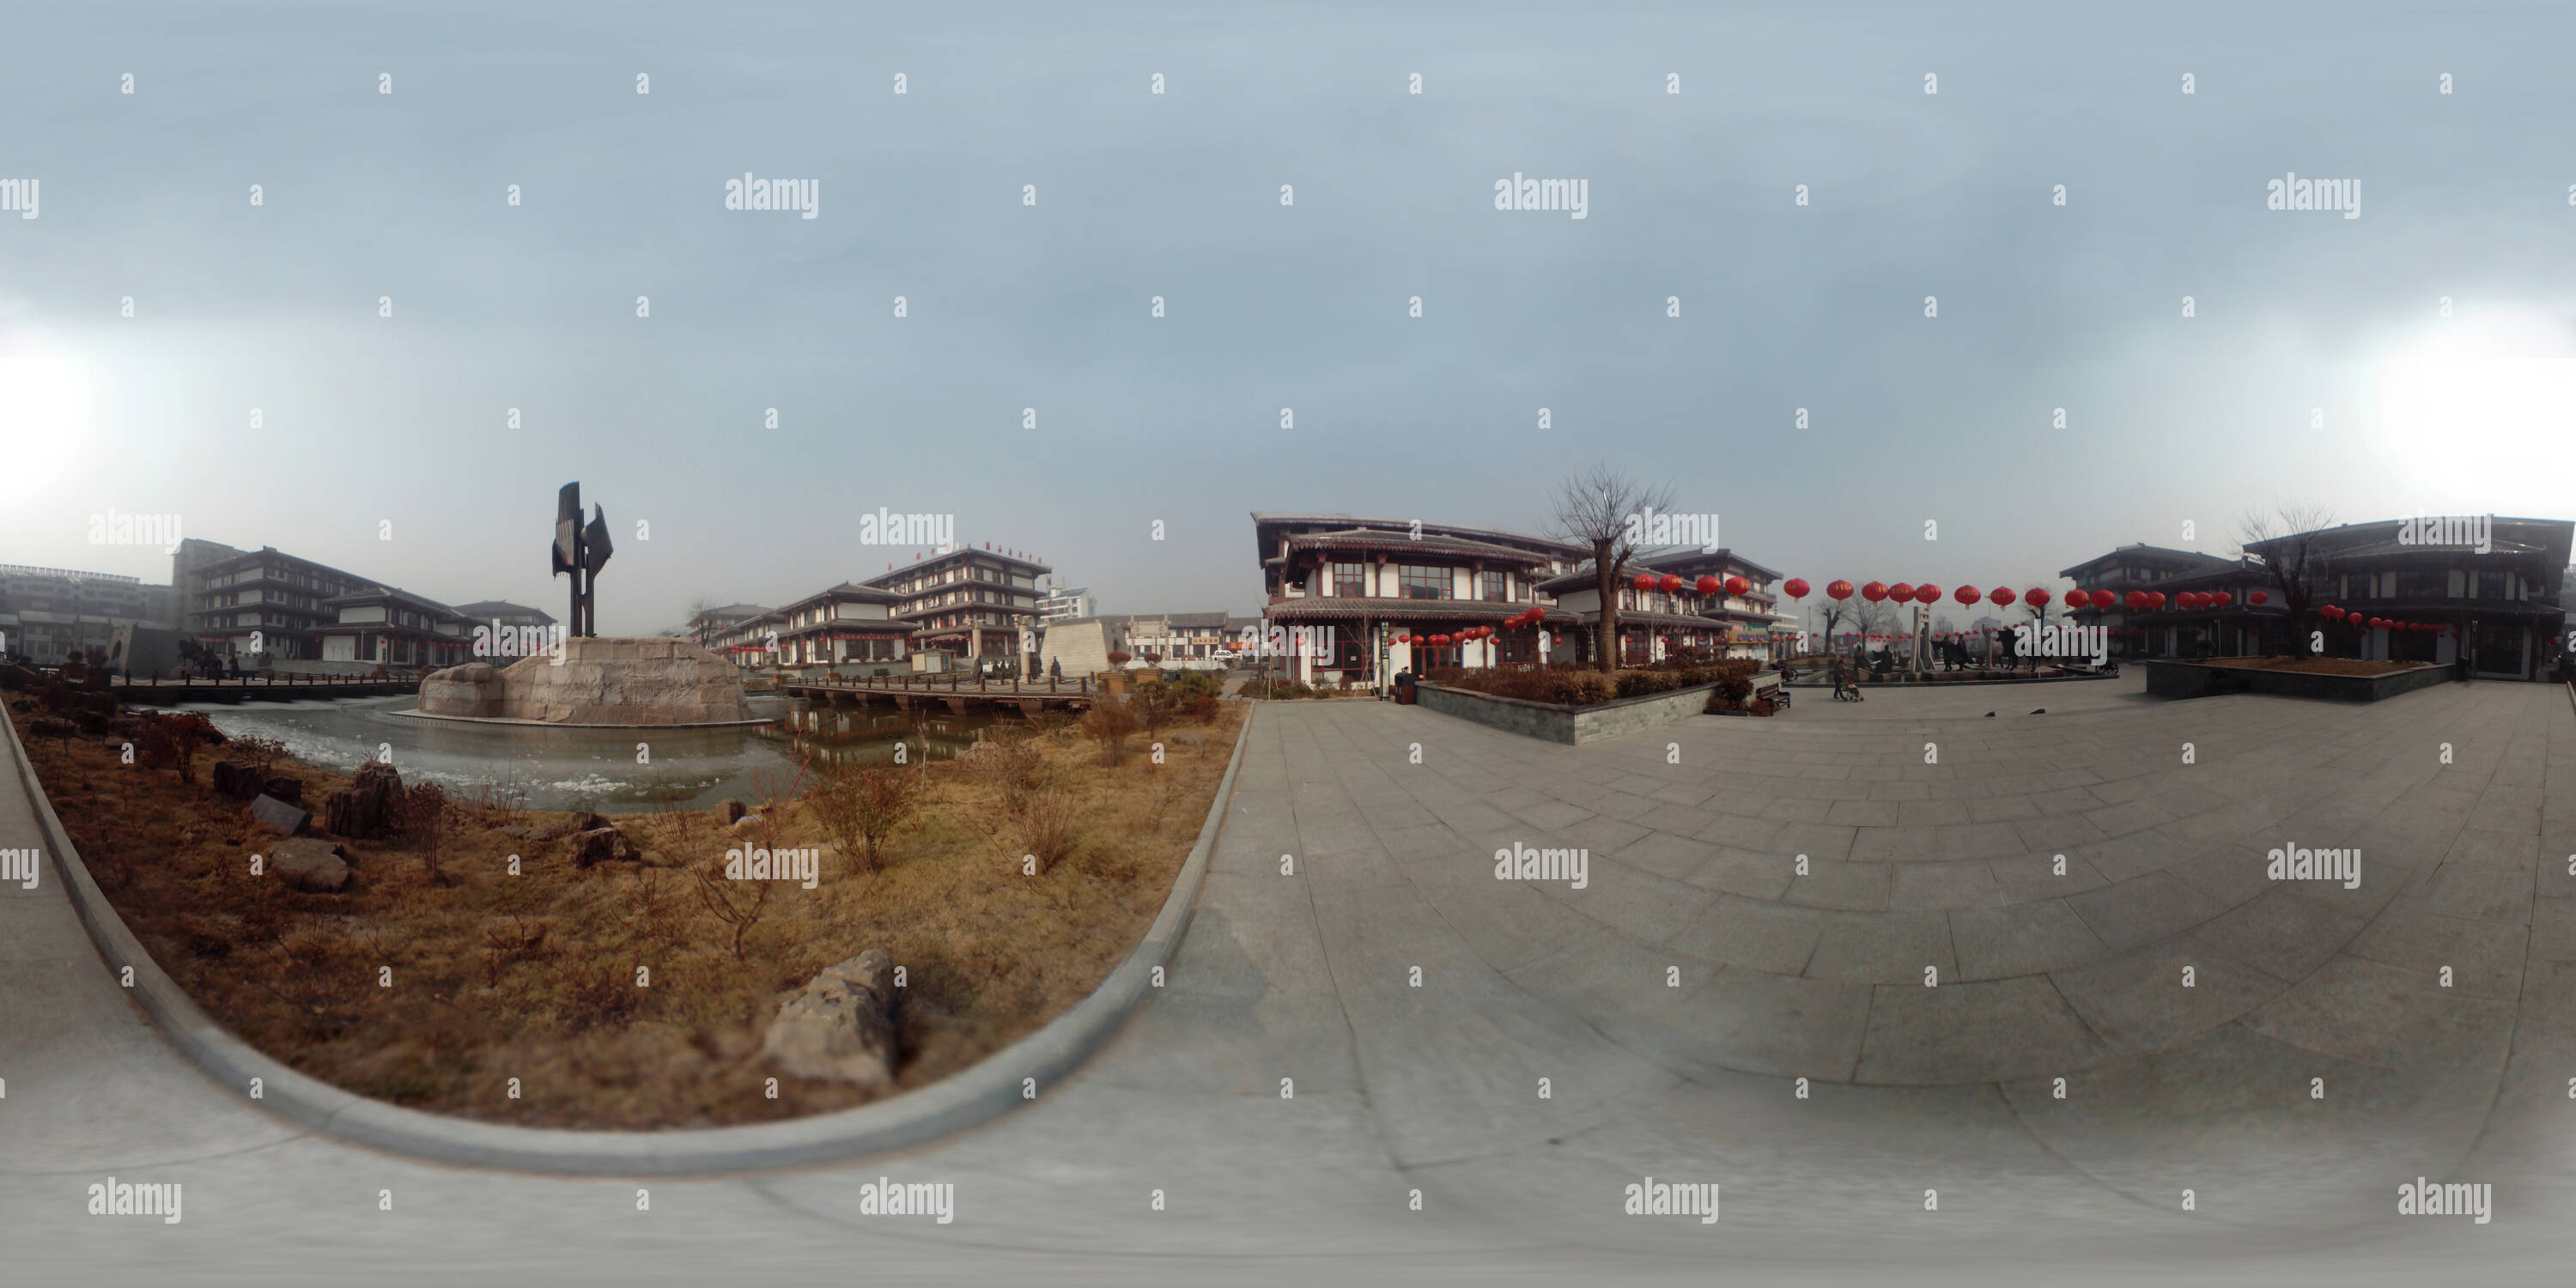 360 degree panoramic view of Yinan County Zhuge Liang City in Shandong Province